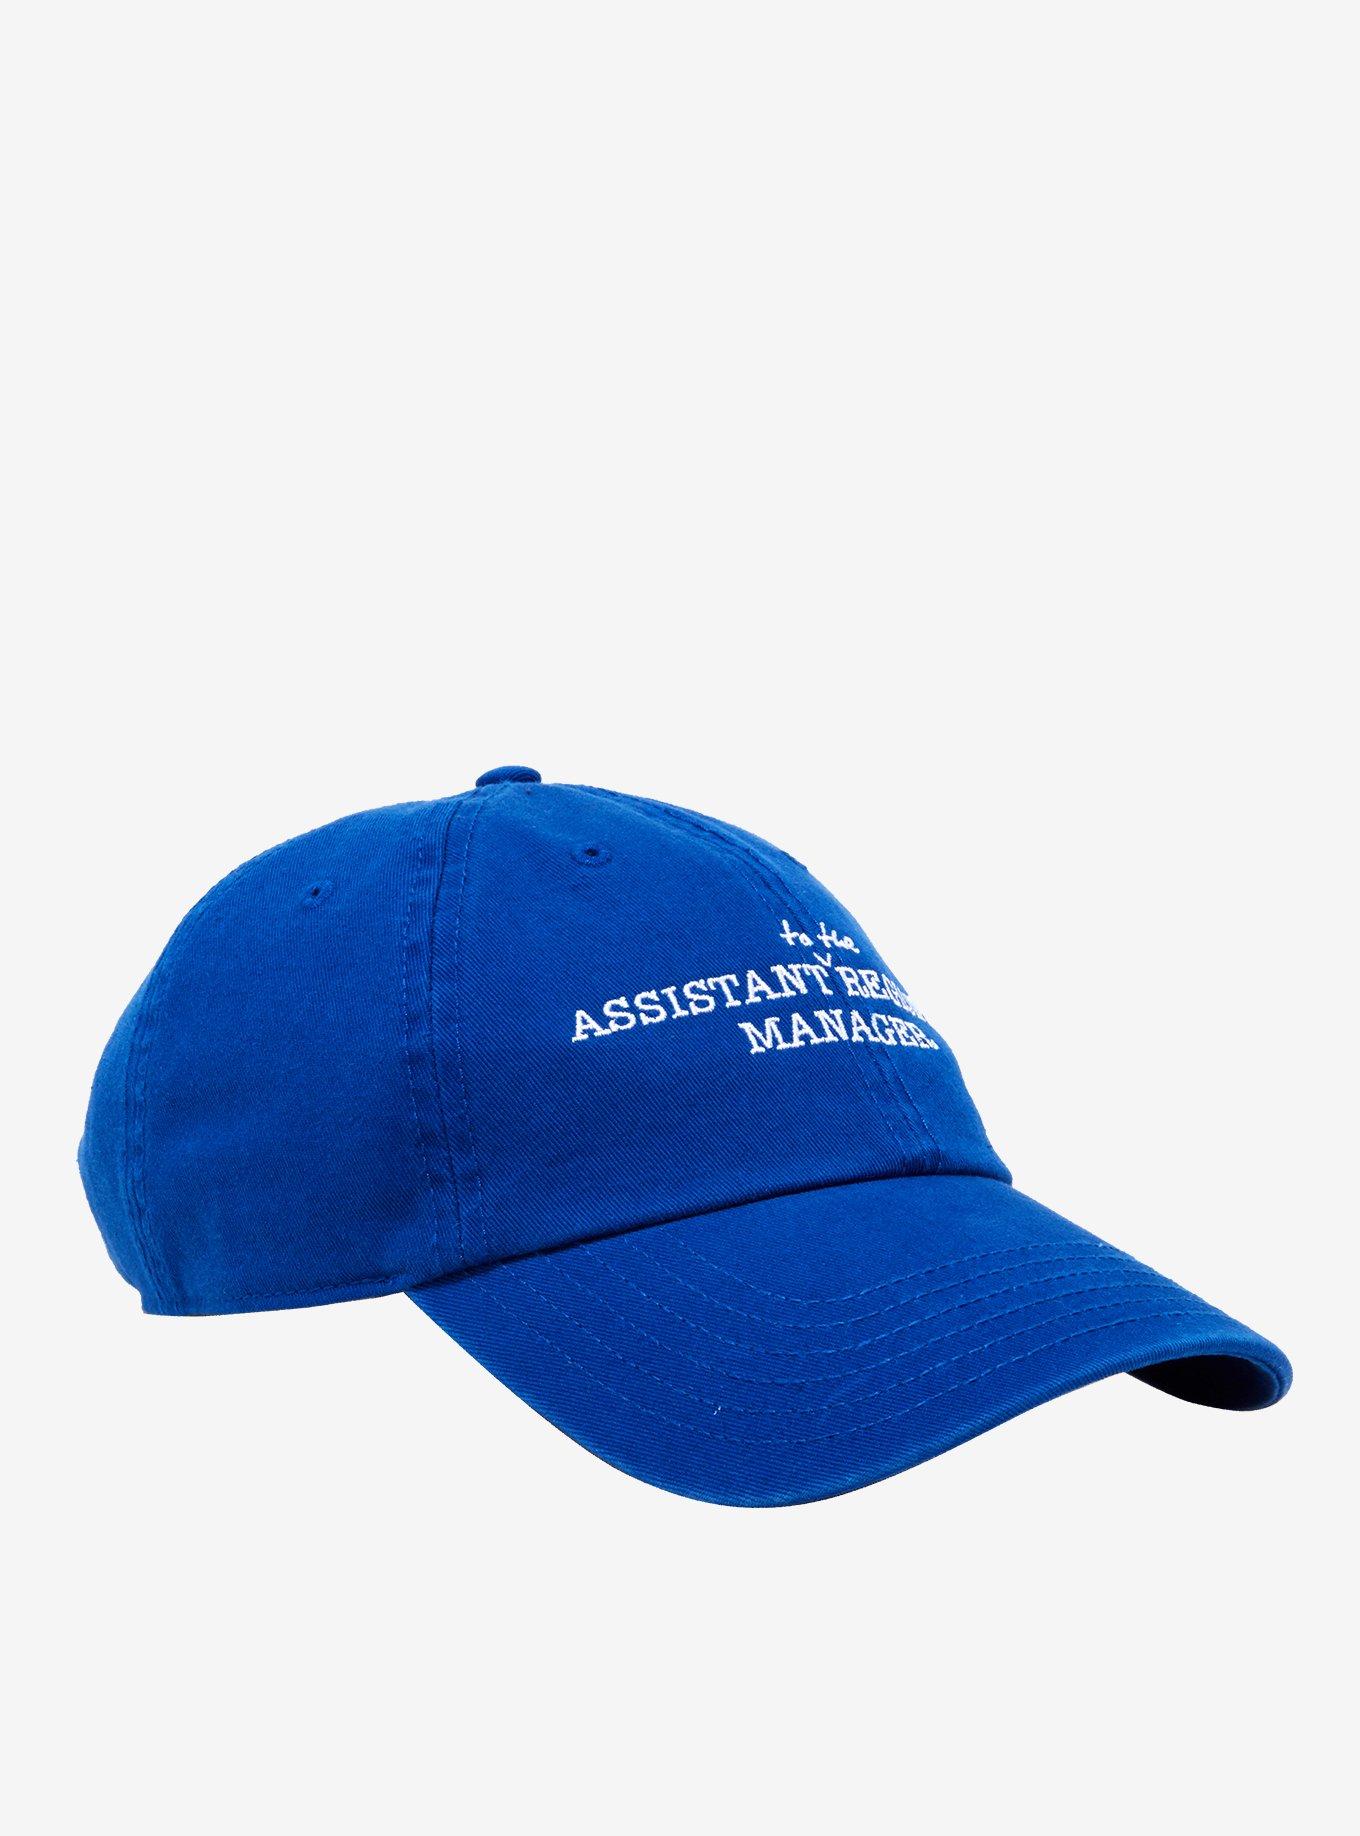 The Office Assistant To The Regional Manager Dad Cap | Hot Topic